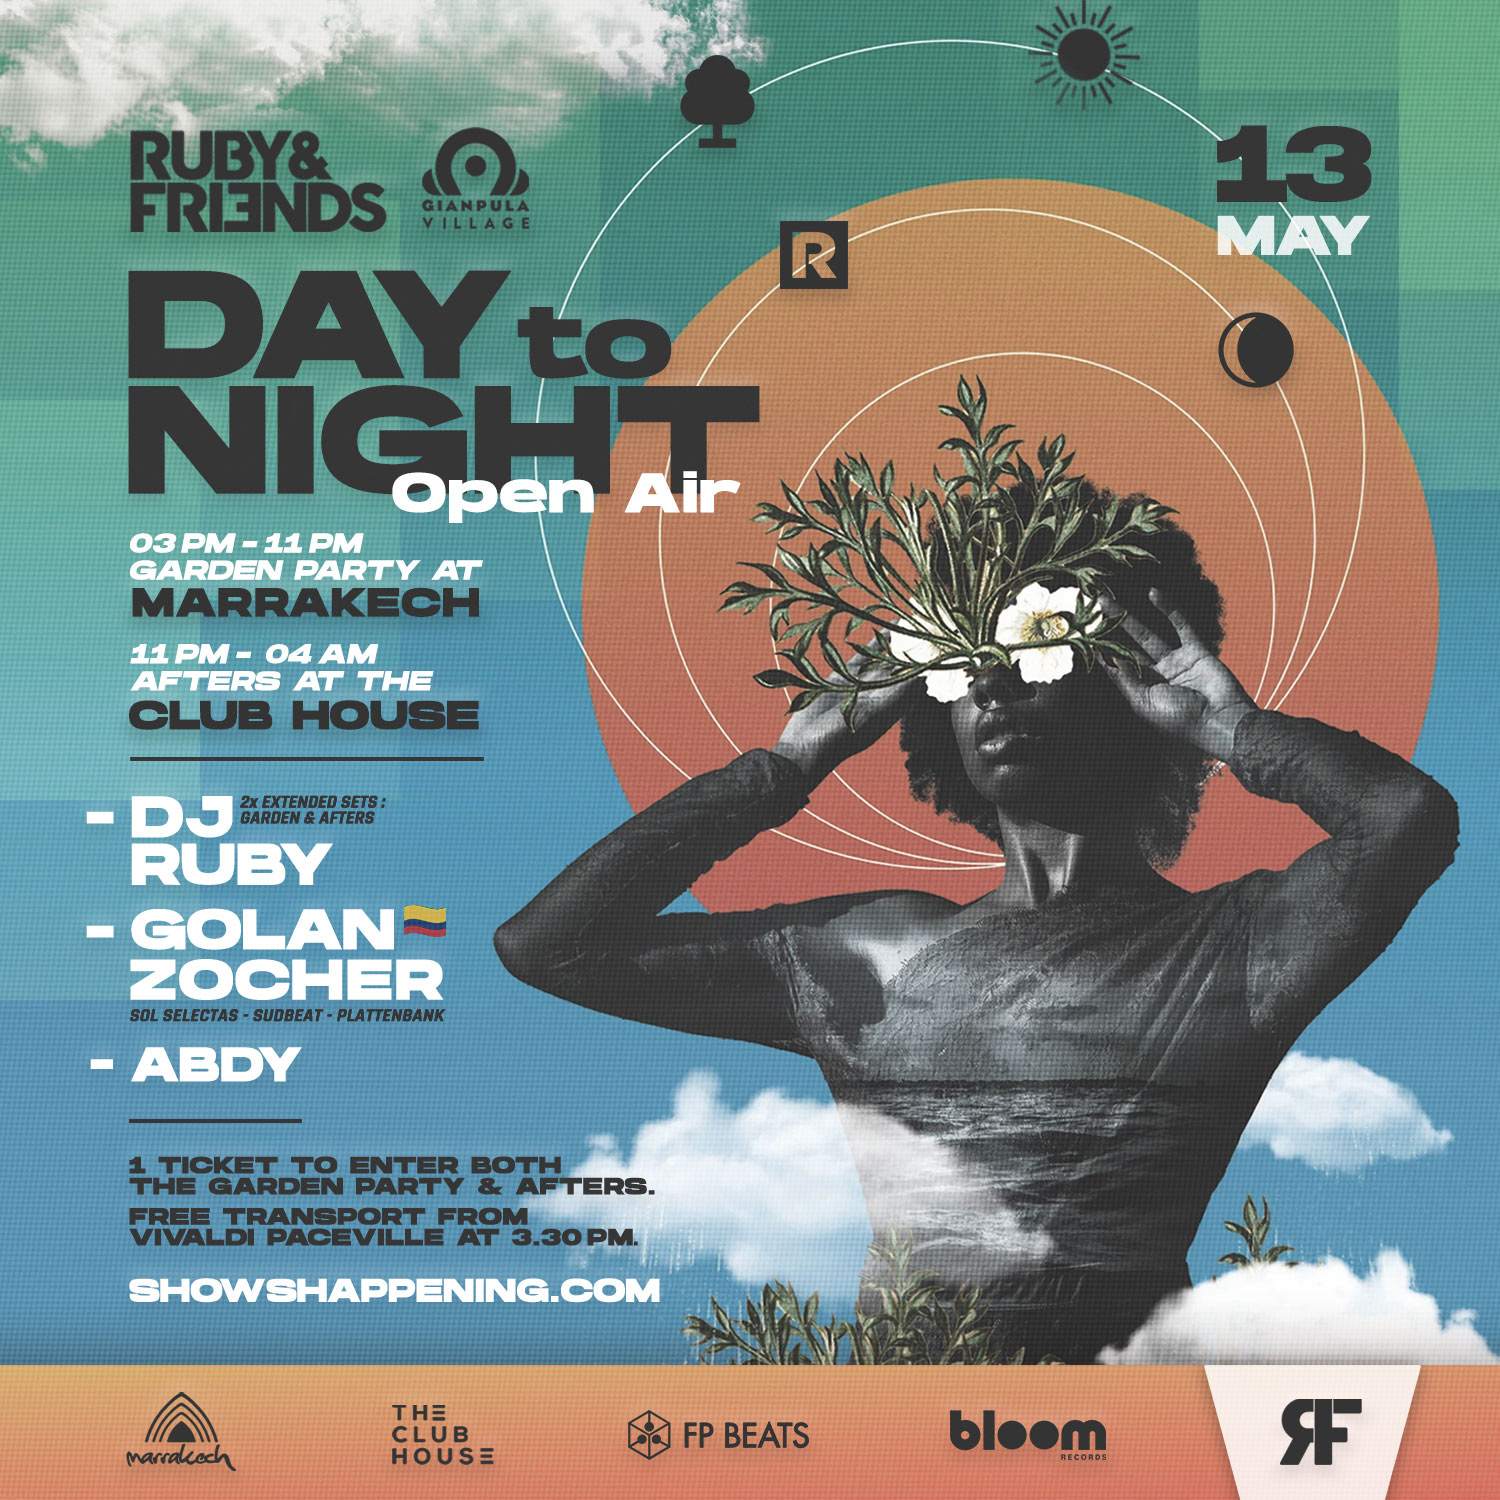 Ruby&friends Day To Night - Open Air Garden Party at Marrakech + Afters at Club House - Página frontal